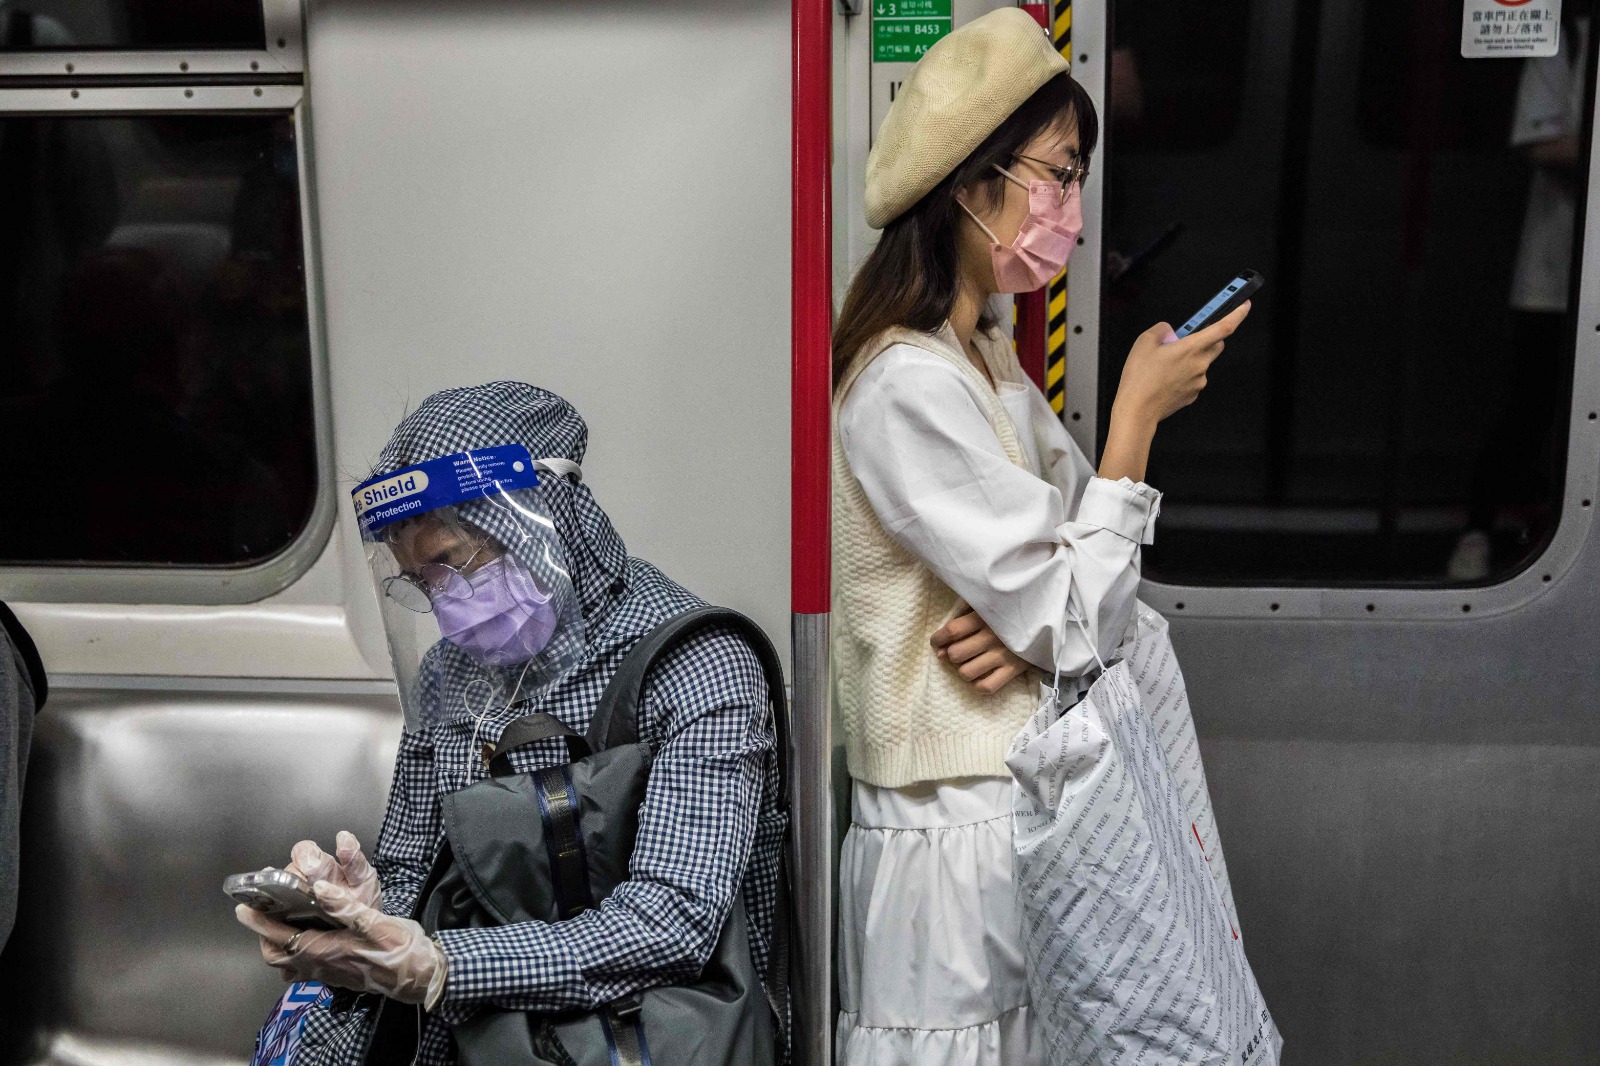 HONG KONG: People wearing face masks as a preventive measure against the COVID-19 coronavirus commute on a train in Hong Kong on March 2, 2022. - AFP